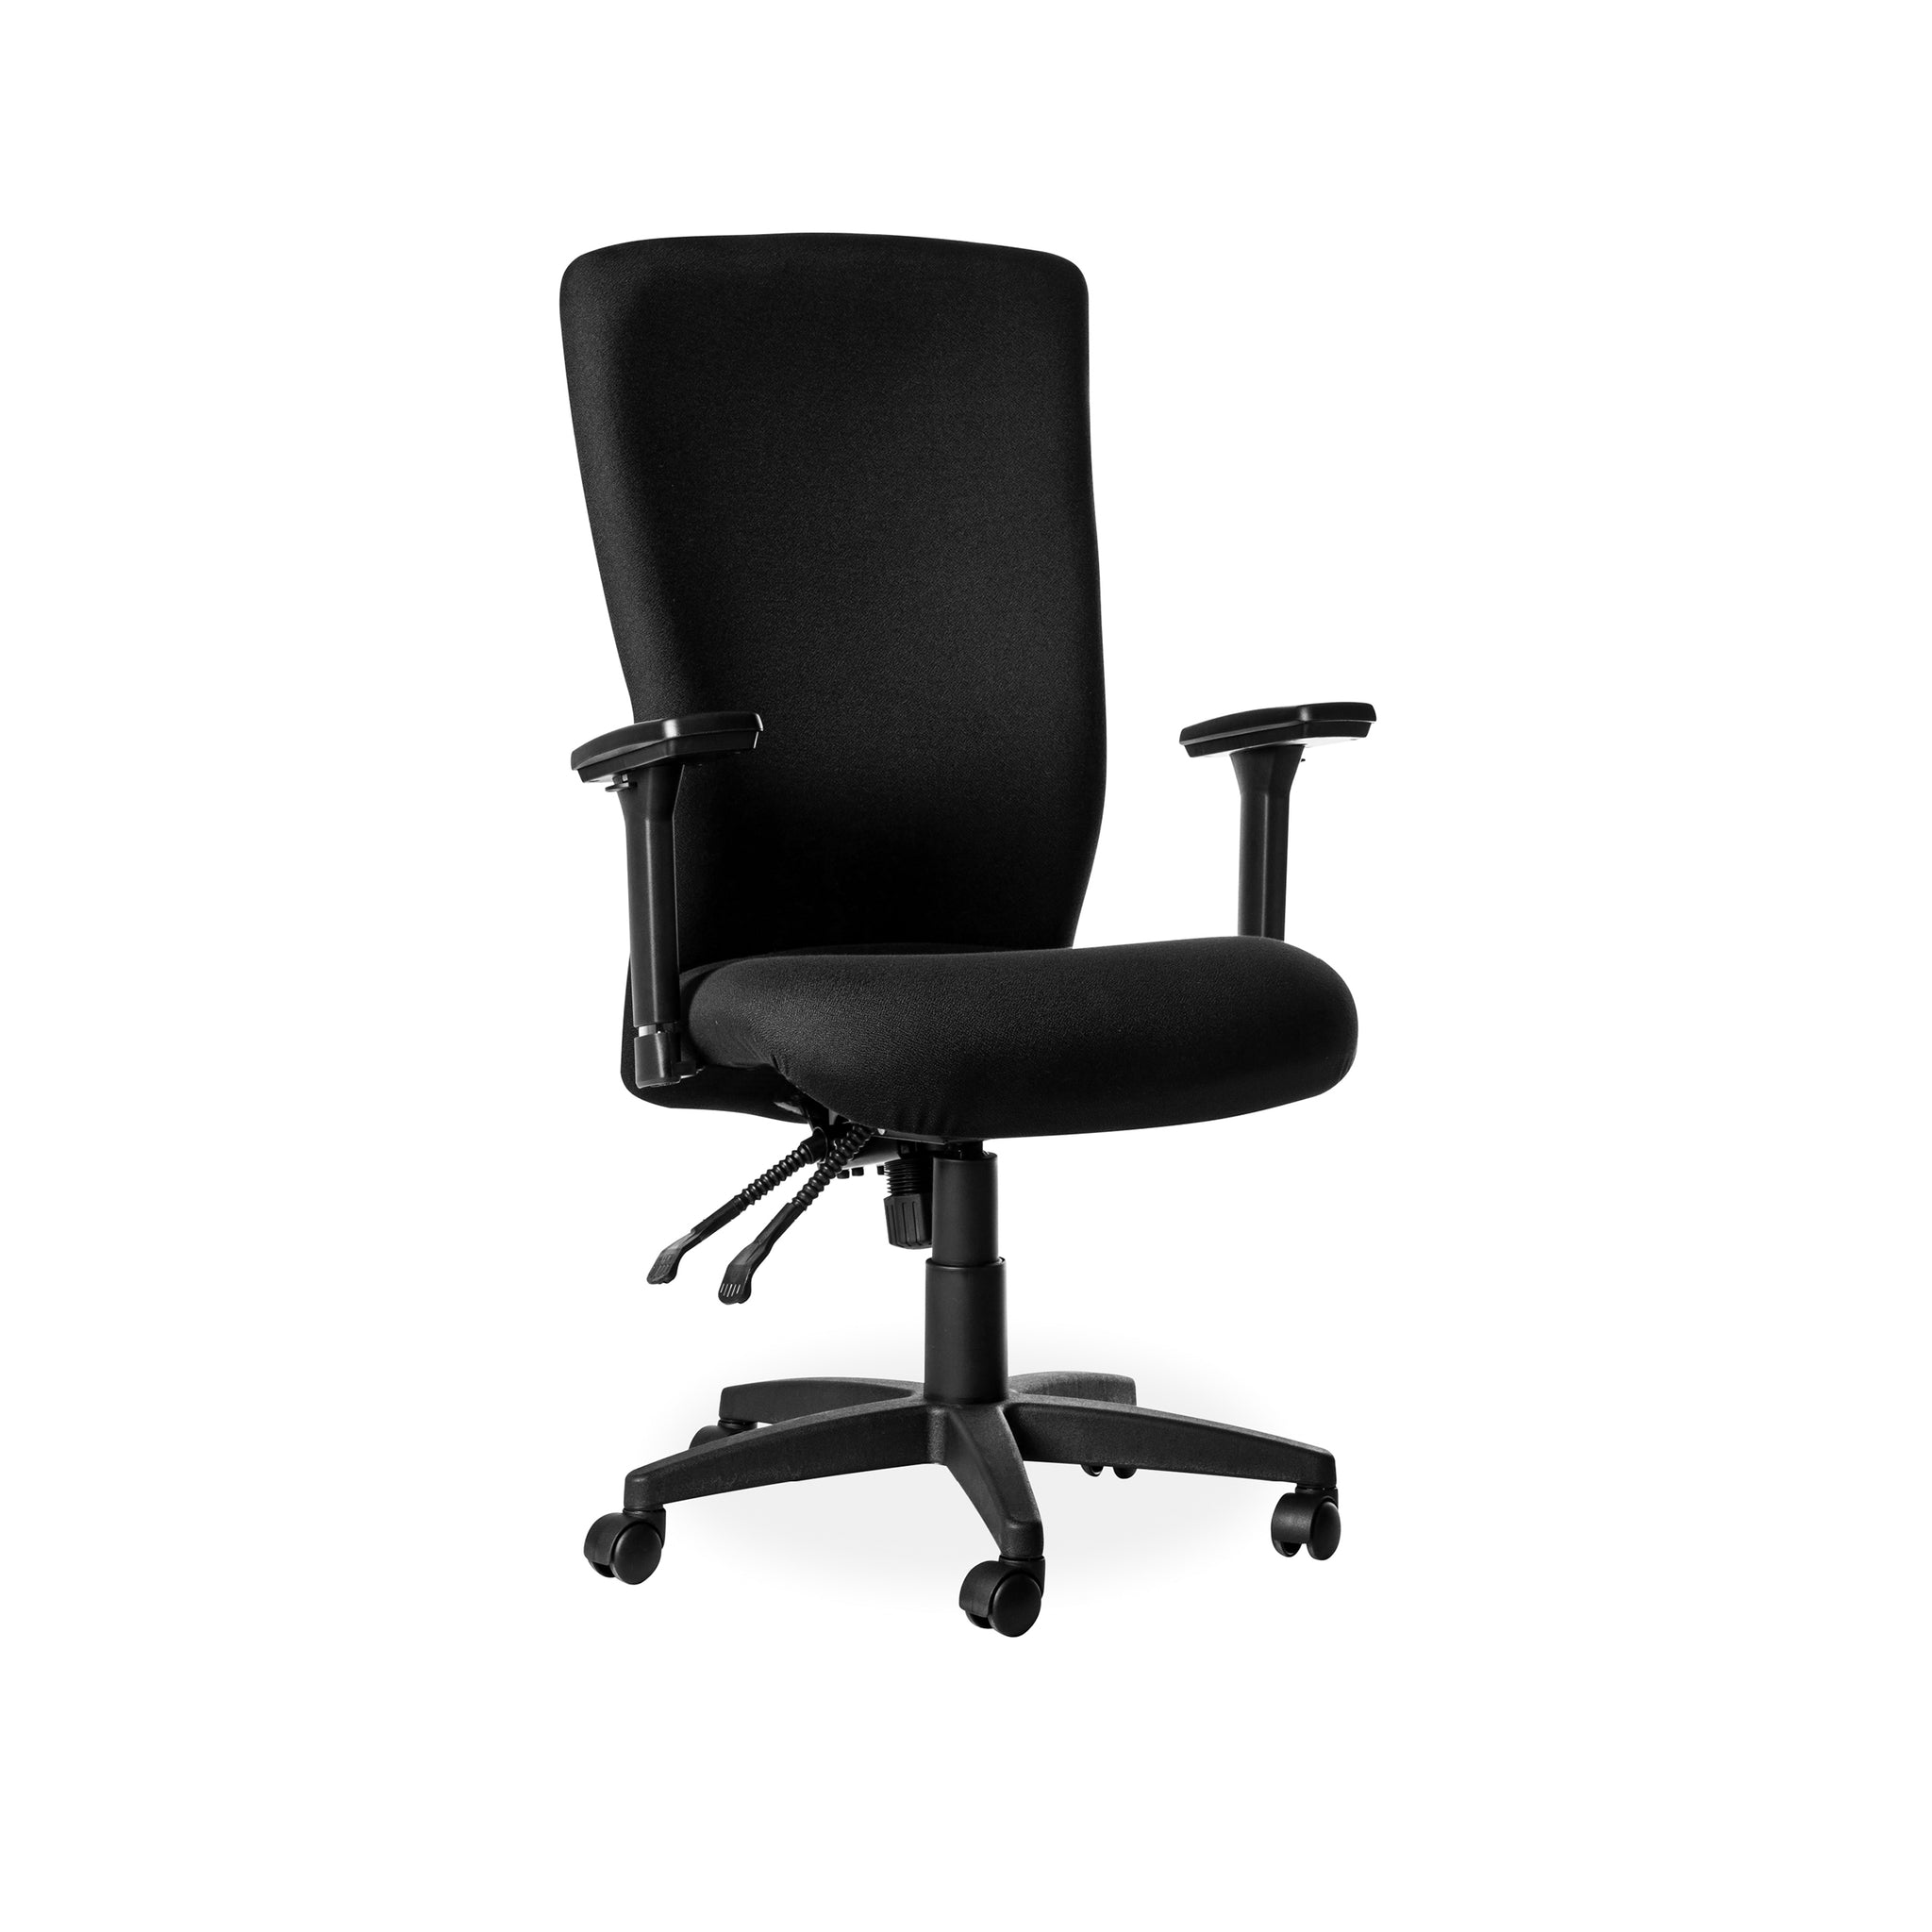 Hedcor Spine Chair